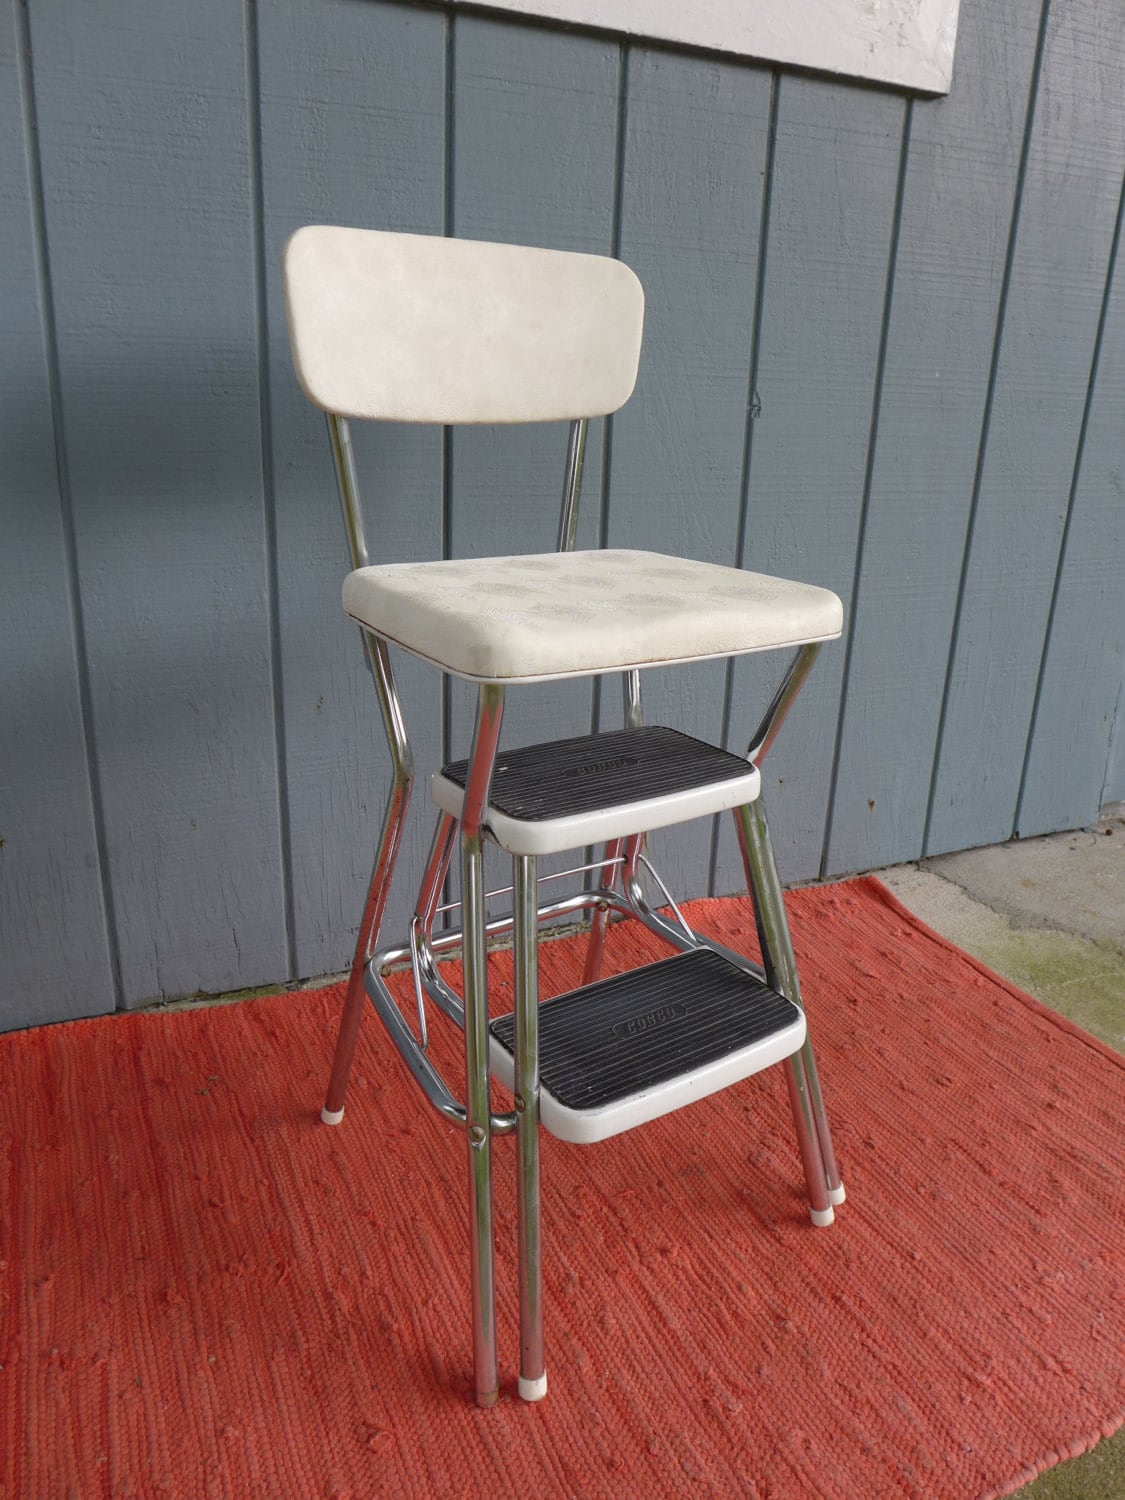 Vintage White COSCO Step Stool Chair Pull Out Steps Metal Kitchen Kids